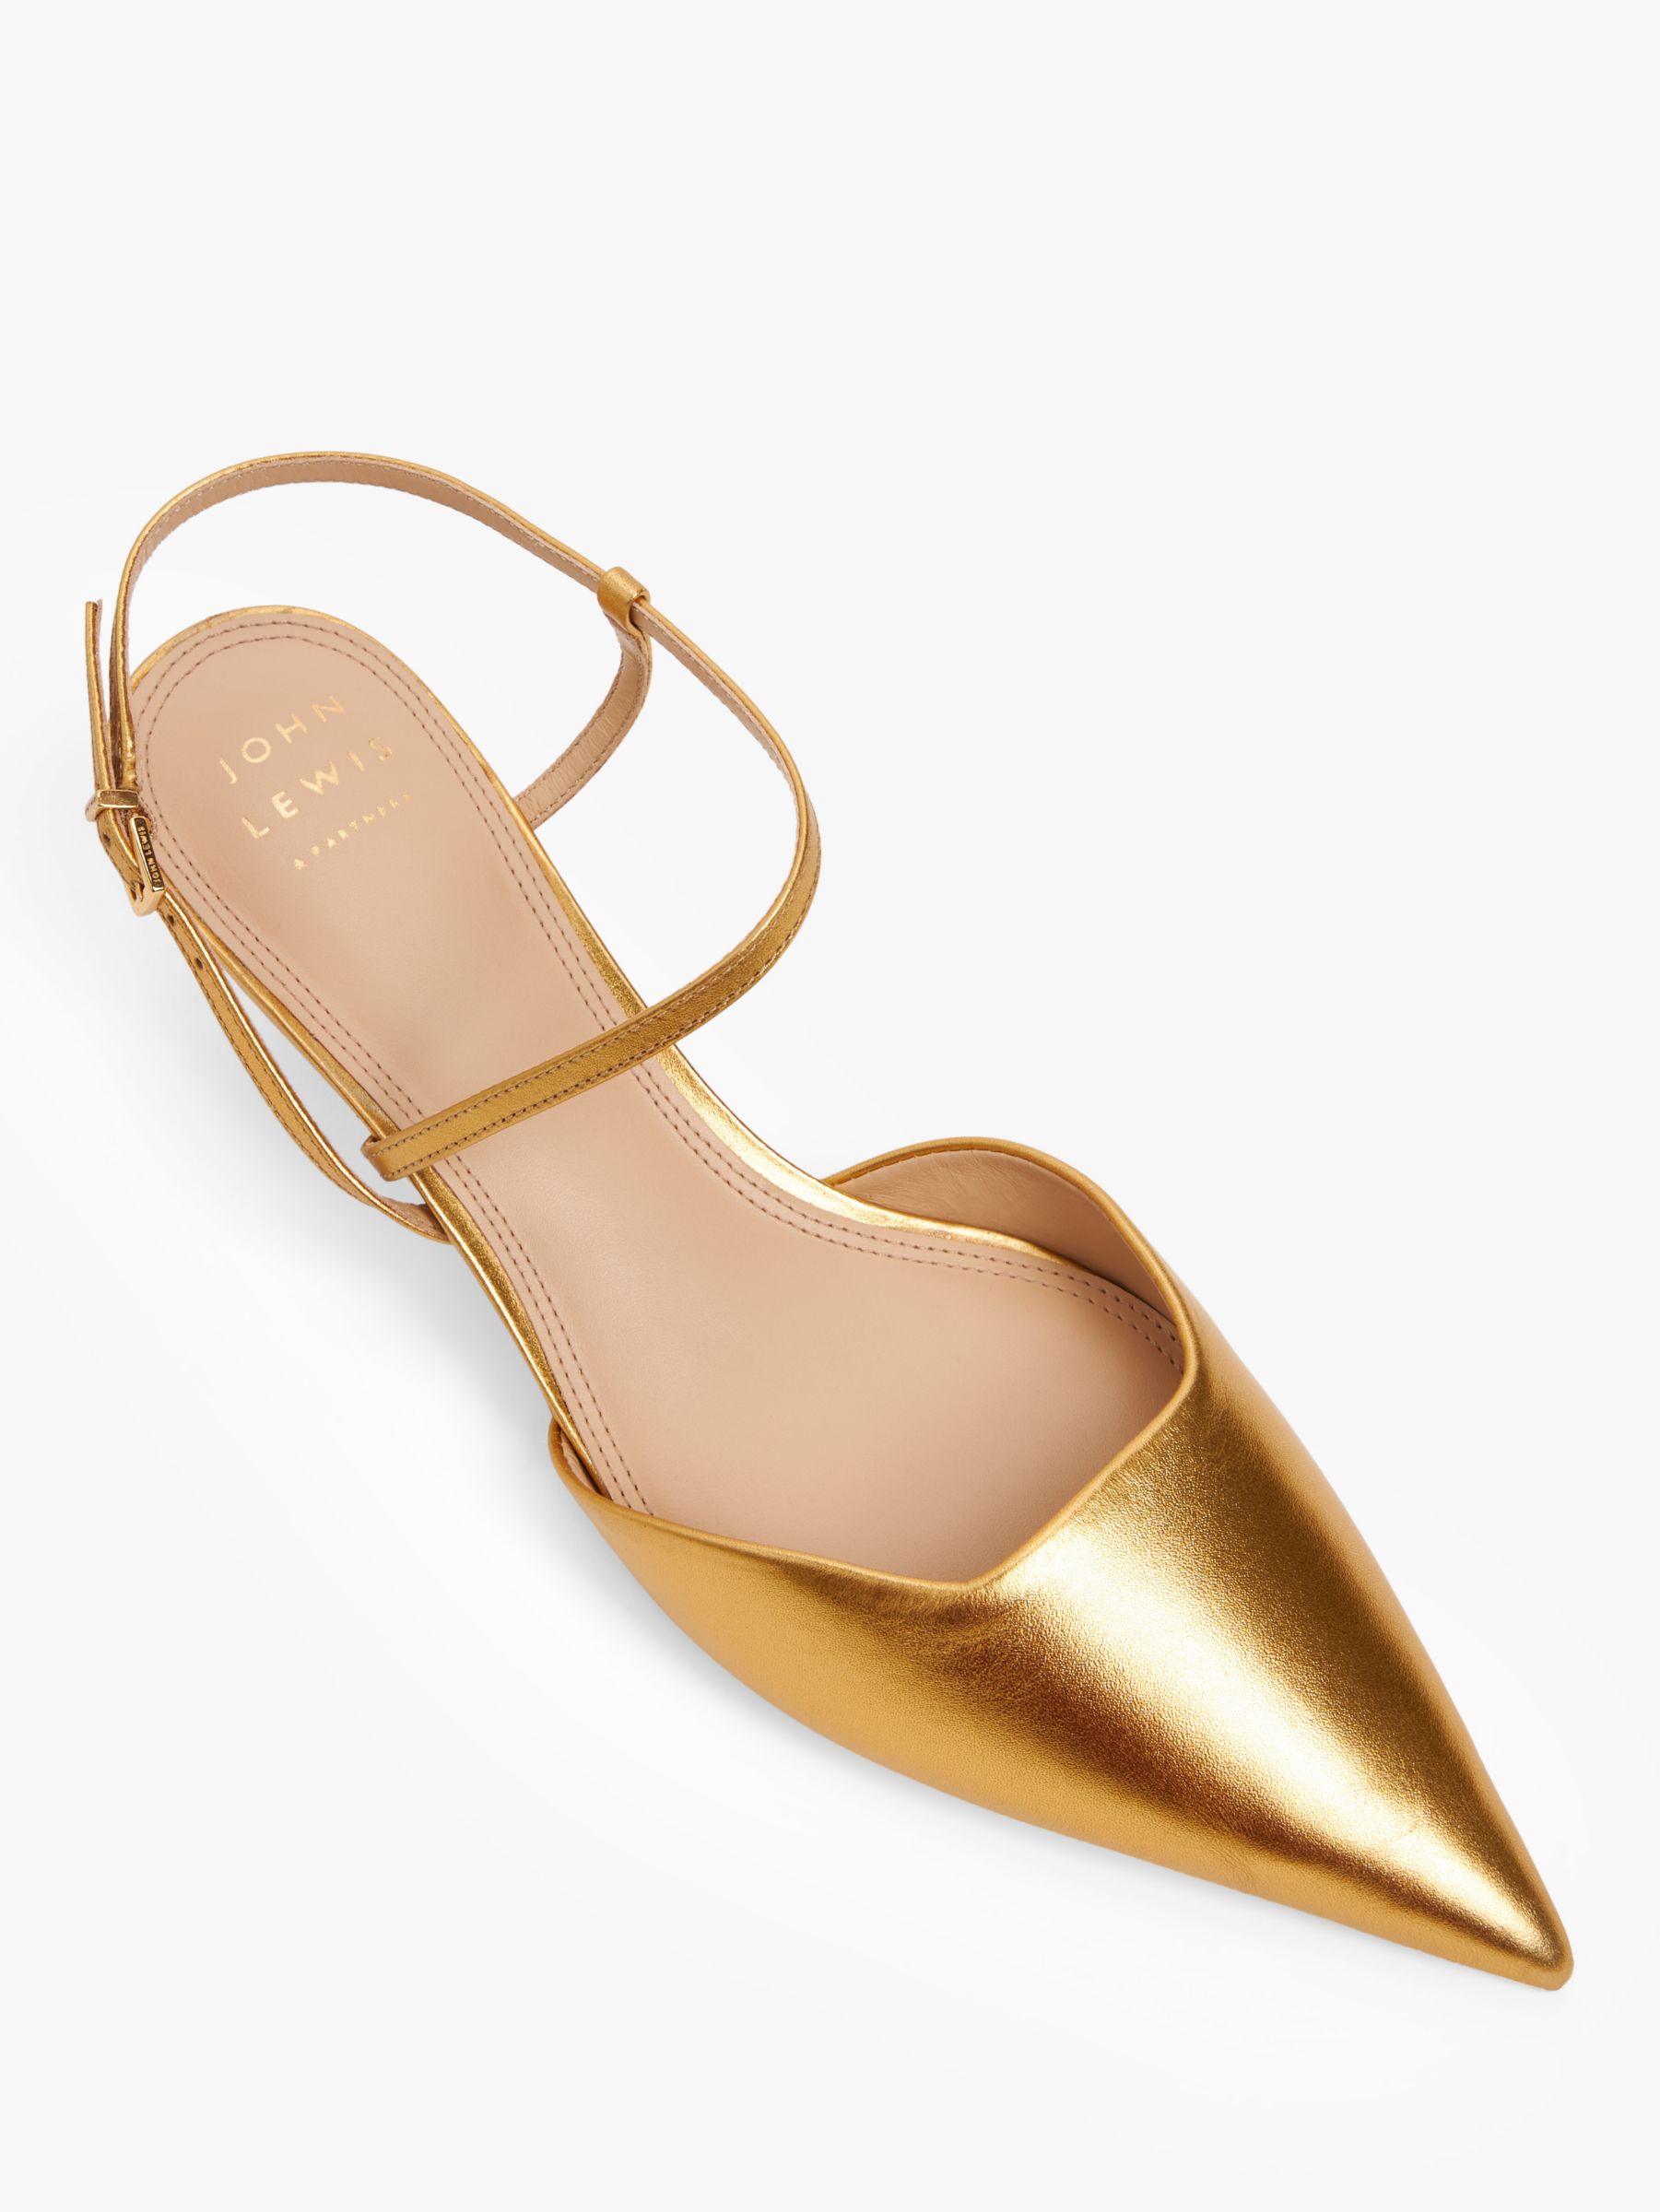 Buy John Lewis Chi Chi Leather Asymmetric Strap Open Court Shoes, Gold Online at johnlewis.com